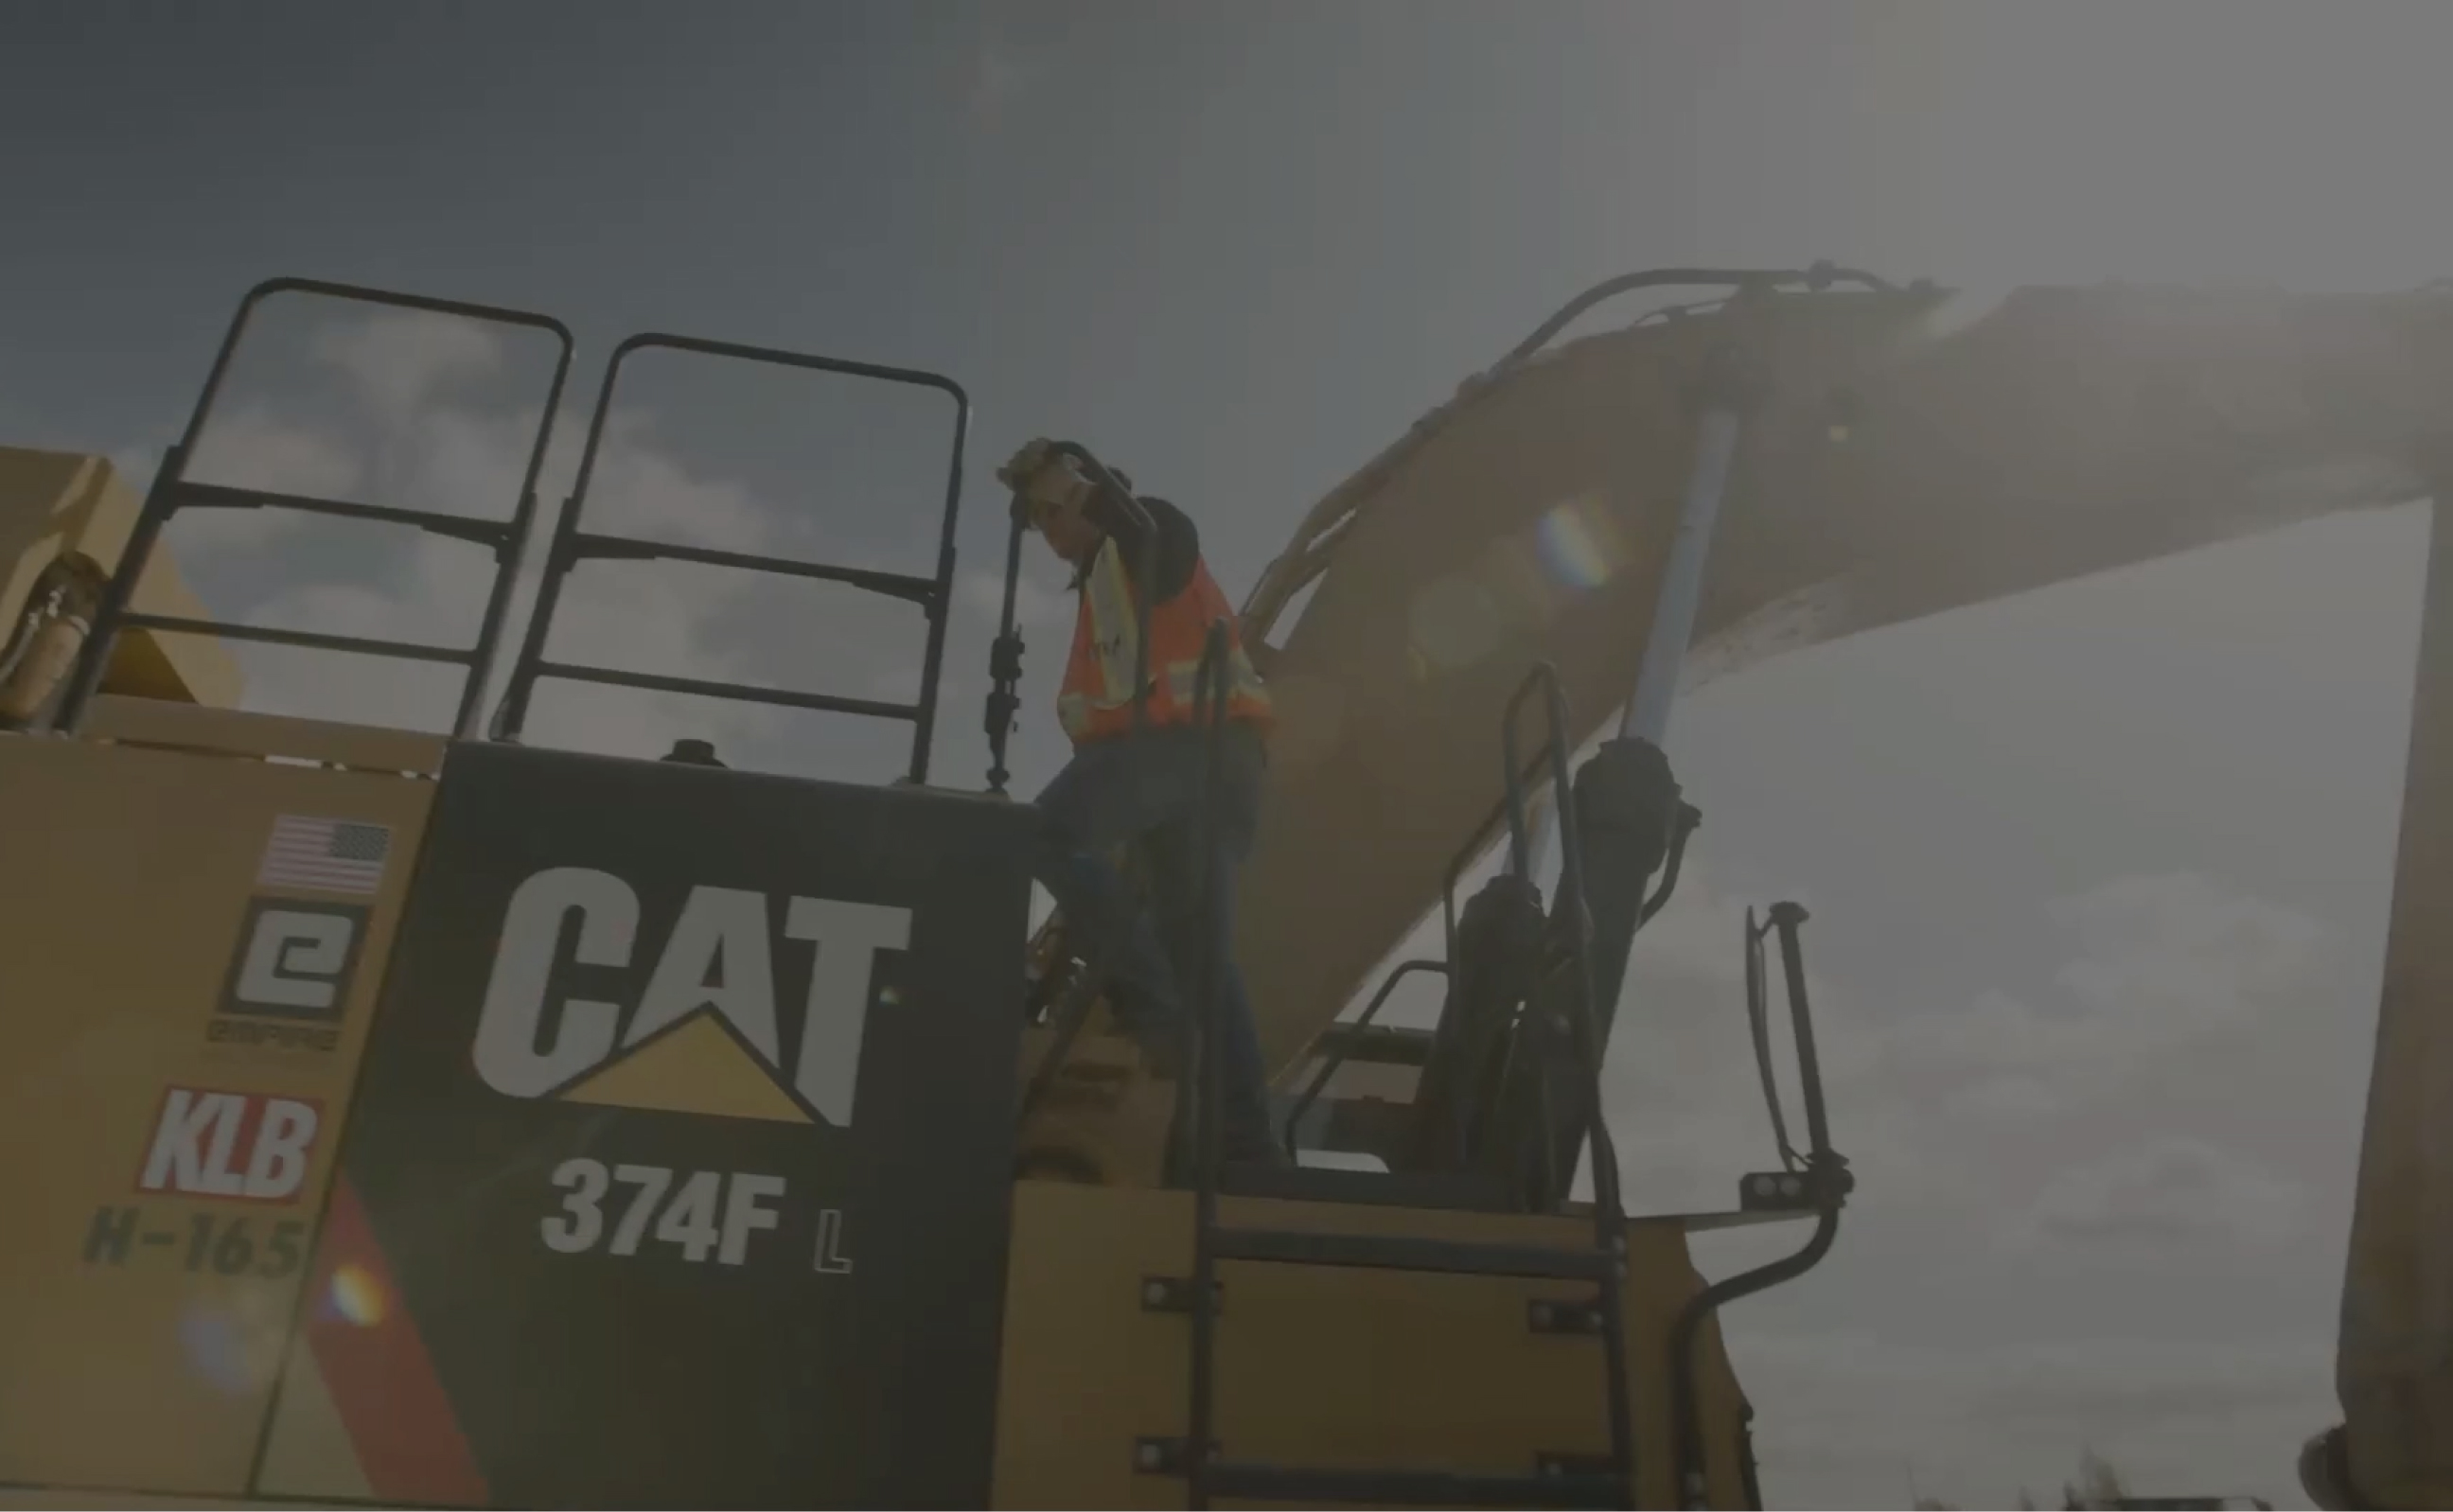 Introduction video where Superintendent is walking on side of excavator inspecting it